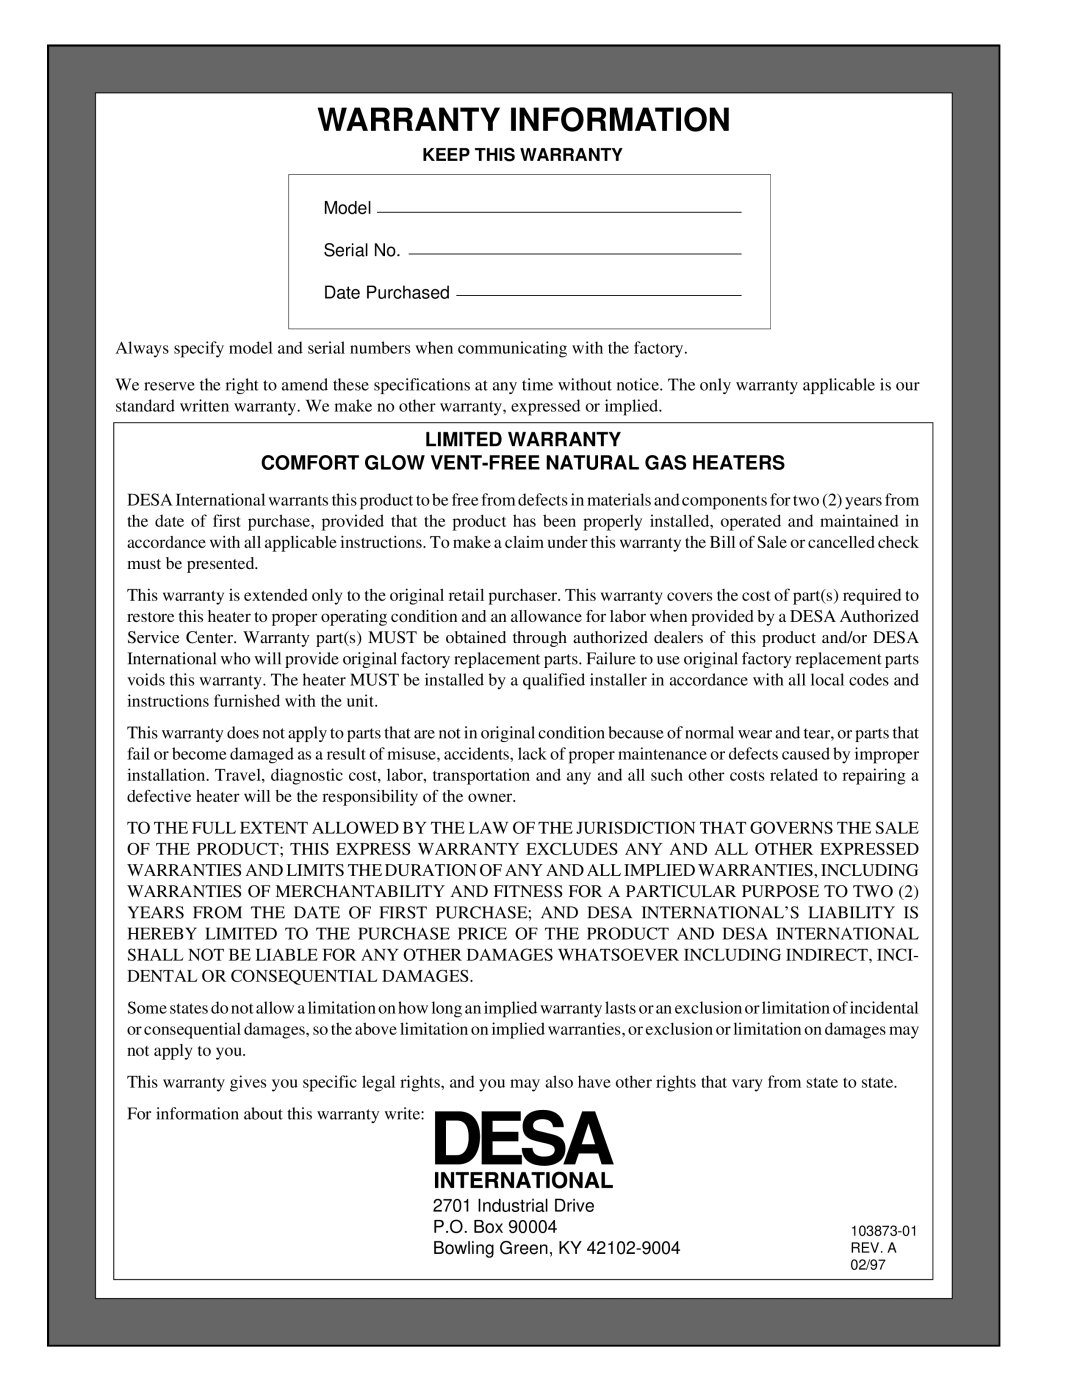 Desa Tech CGN20TL, CGN30TL Warranty Information, Limited Warranty Comfort Glow Vent-Free Natural Gas Heaters 